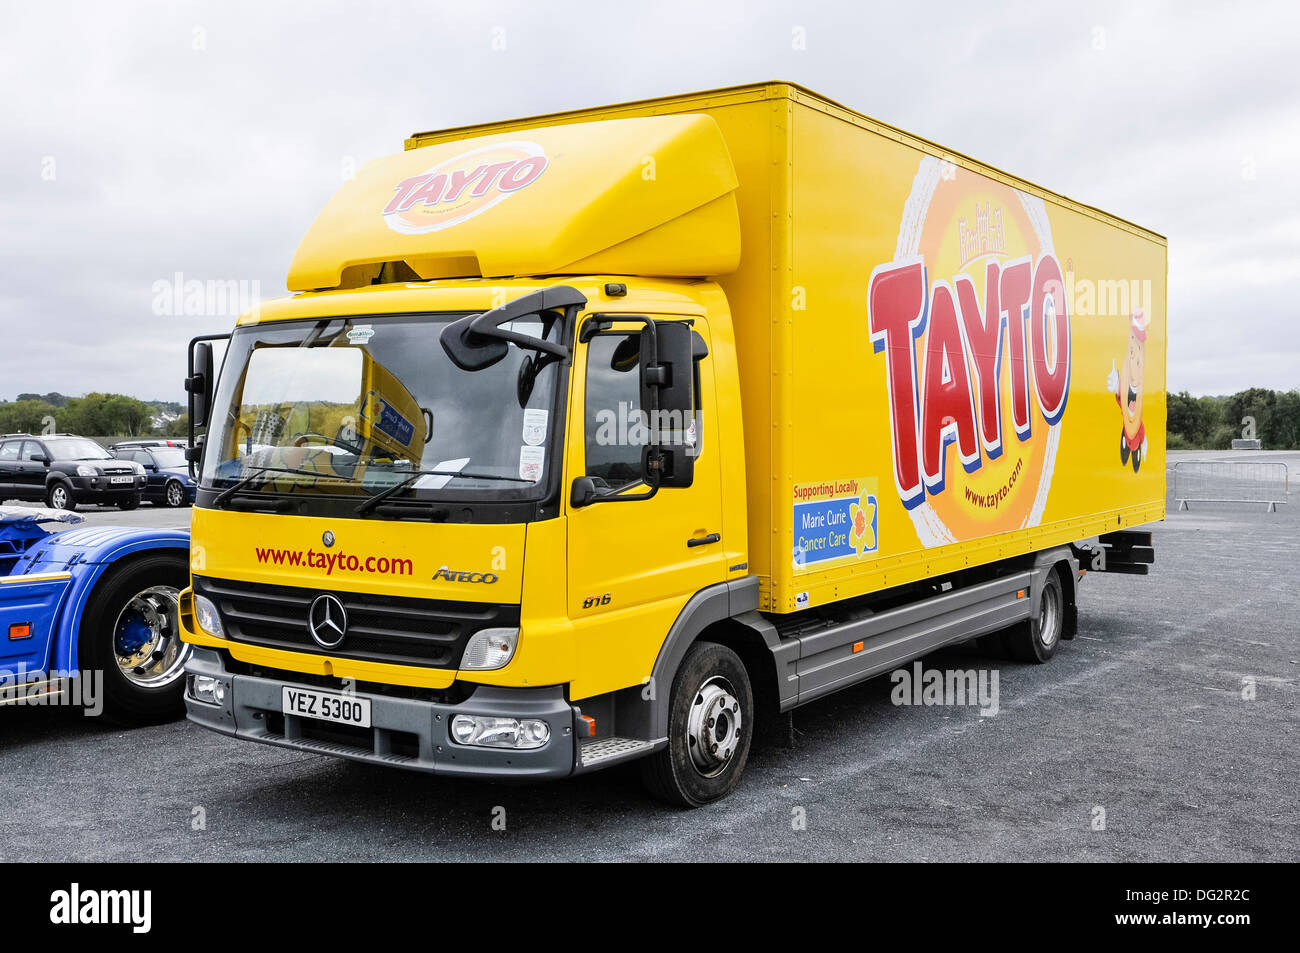 A Mercedes Benz Atego 816 7.5t lorry owned by Tayto (one of the most popular brands of potato crisps and snacks in Ireland) Stock Photo